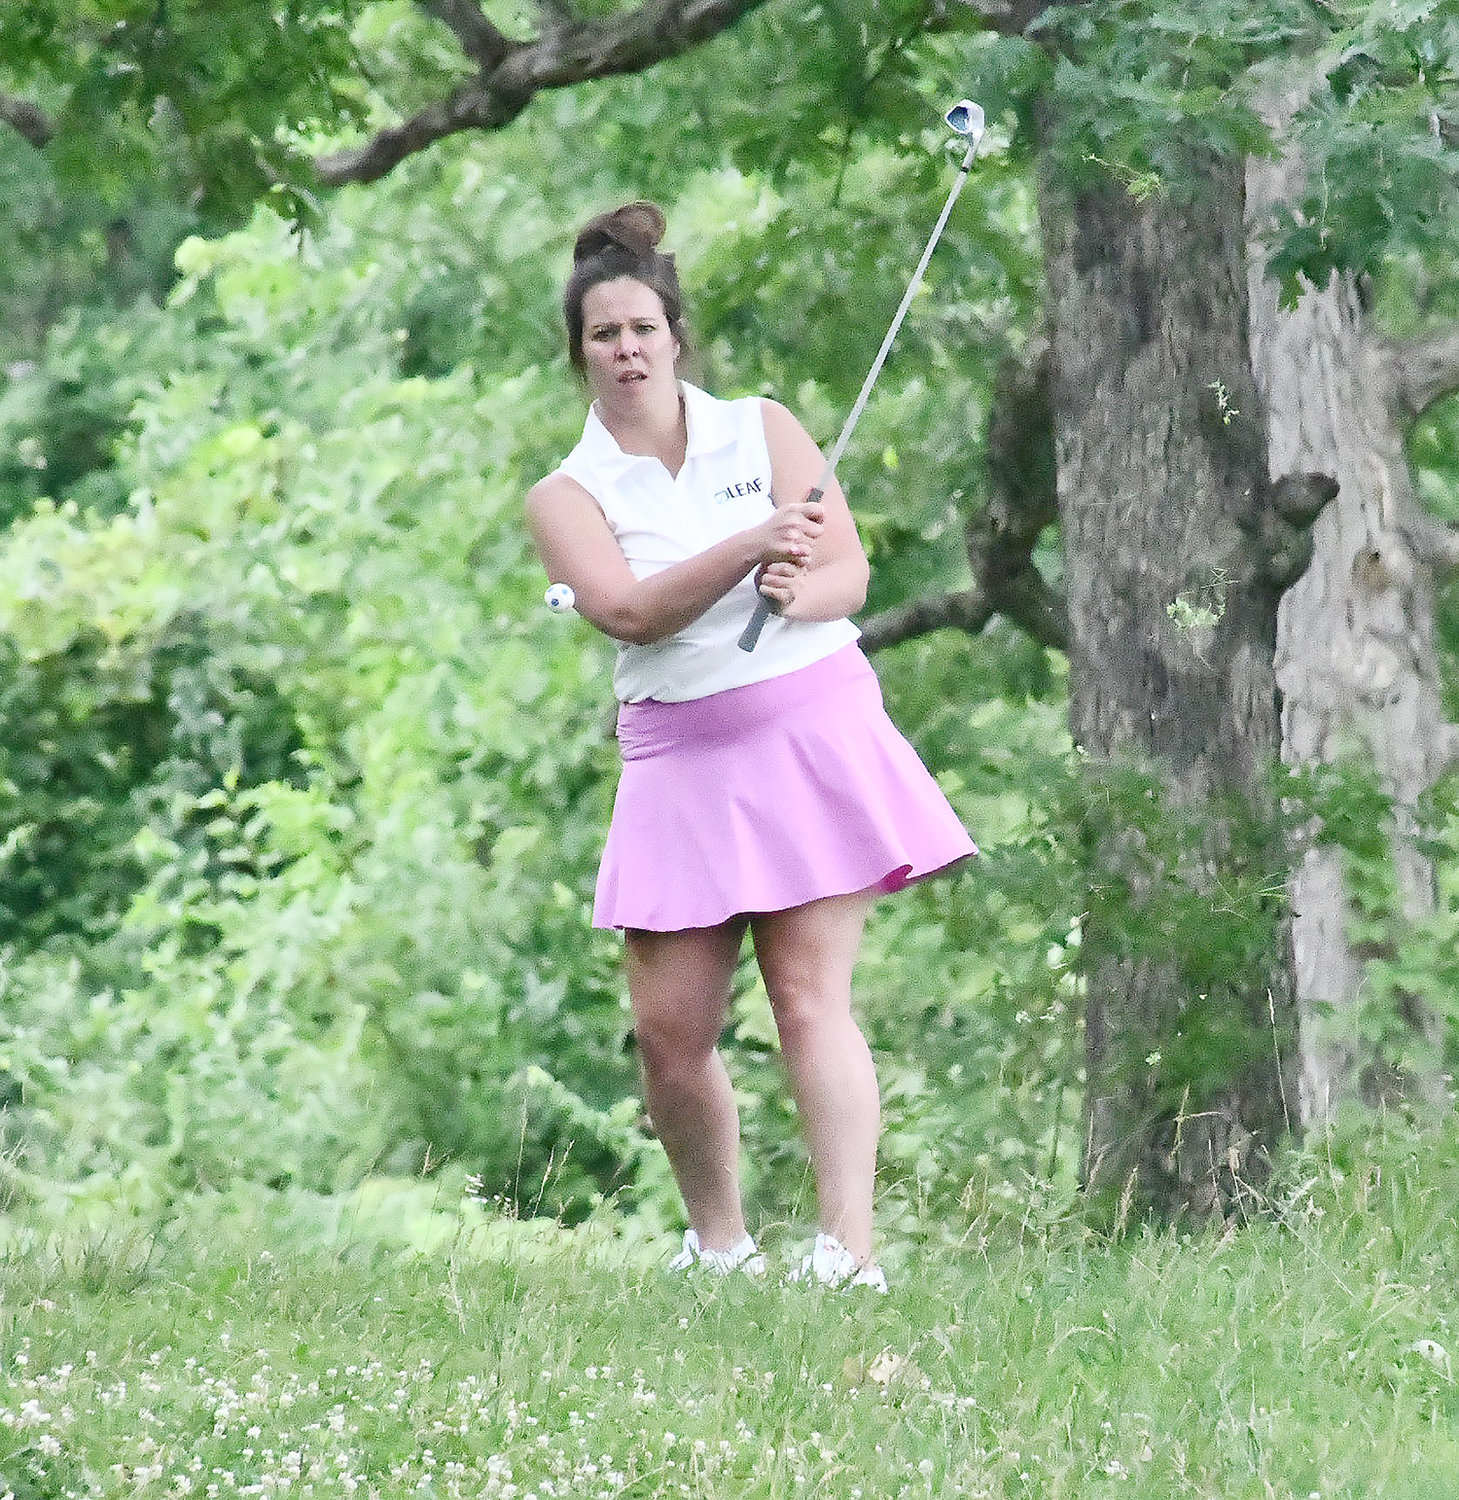 Felicia Bowden, from Team Leaf, hits her second shot from thick rough at Heritage Hills Golf Course.